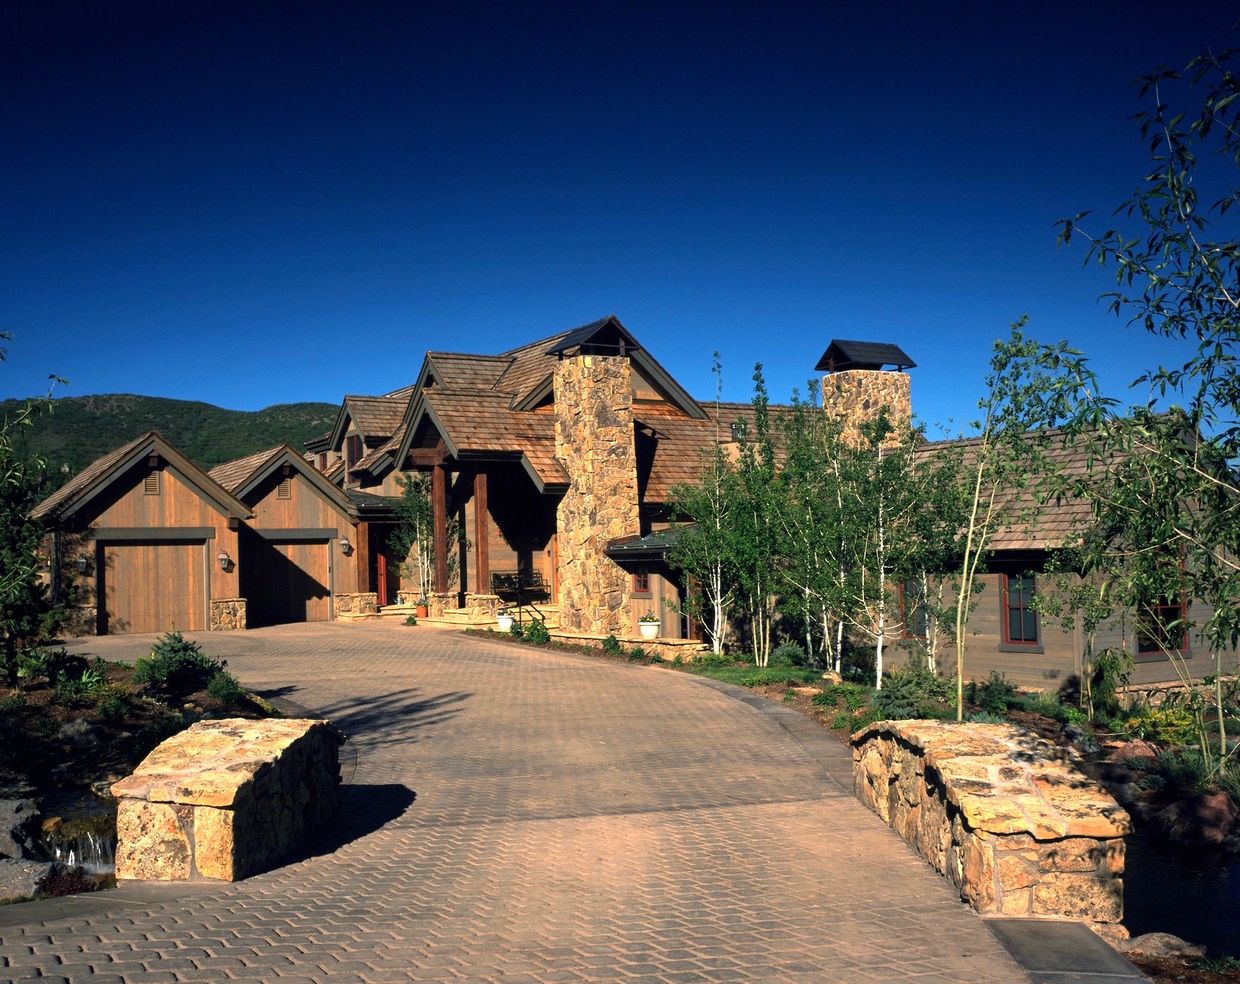 A custom mountain home designed by an architect in Aspen, Colorado. Enjoy life with horses on ranch.